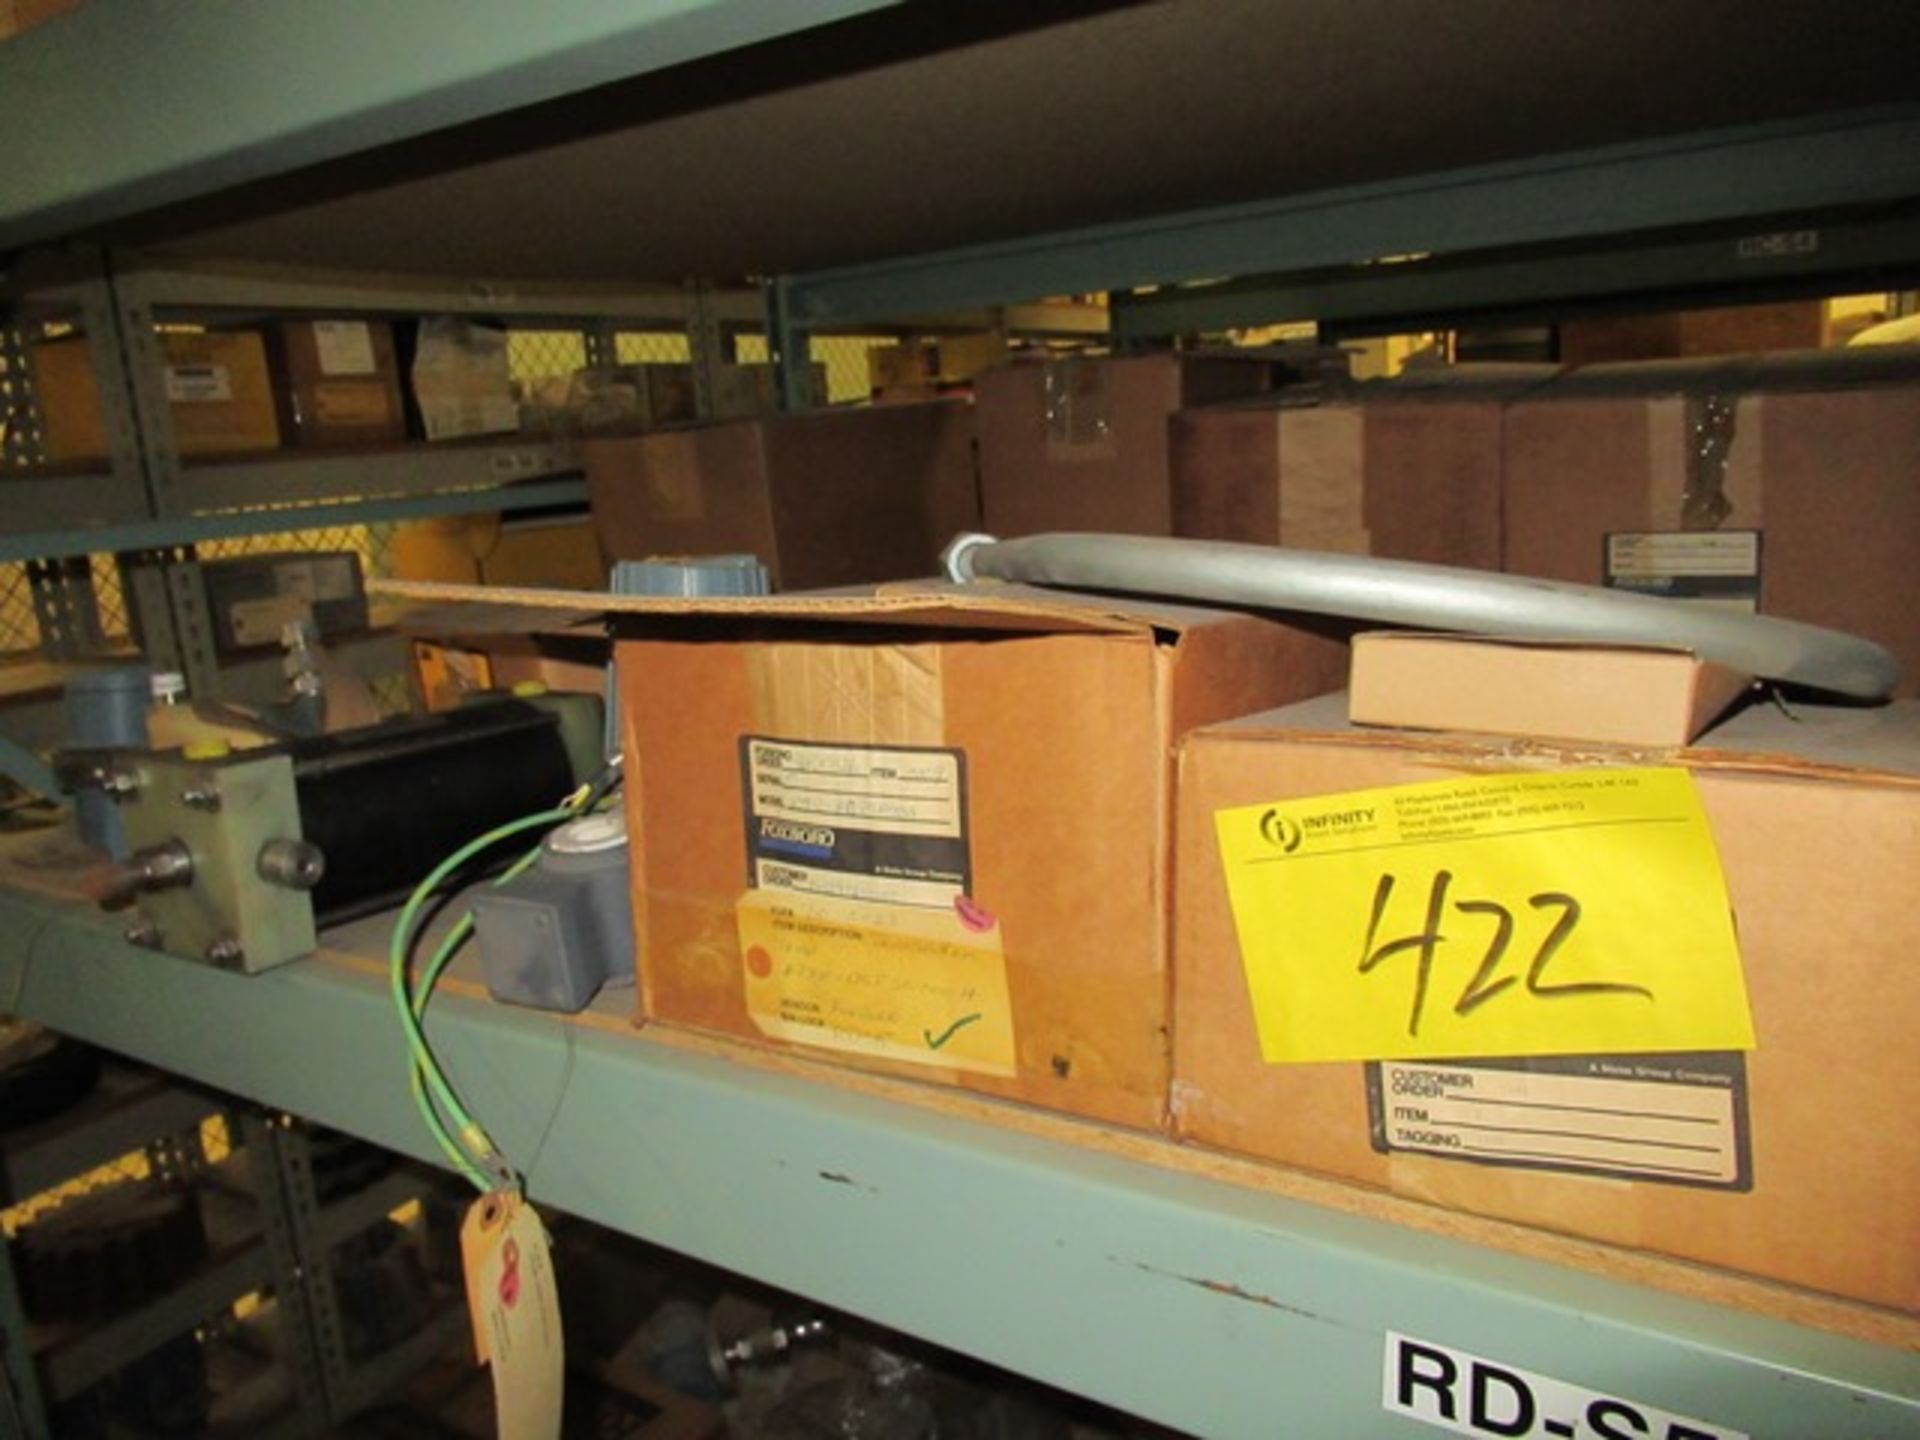 LOT ASST. FOXBORO VALVES, BLACK CLAWSON FILTERS, ETC. 1 SECTION RACKING (M-S) - Image 9 of 11